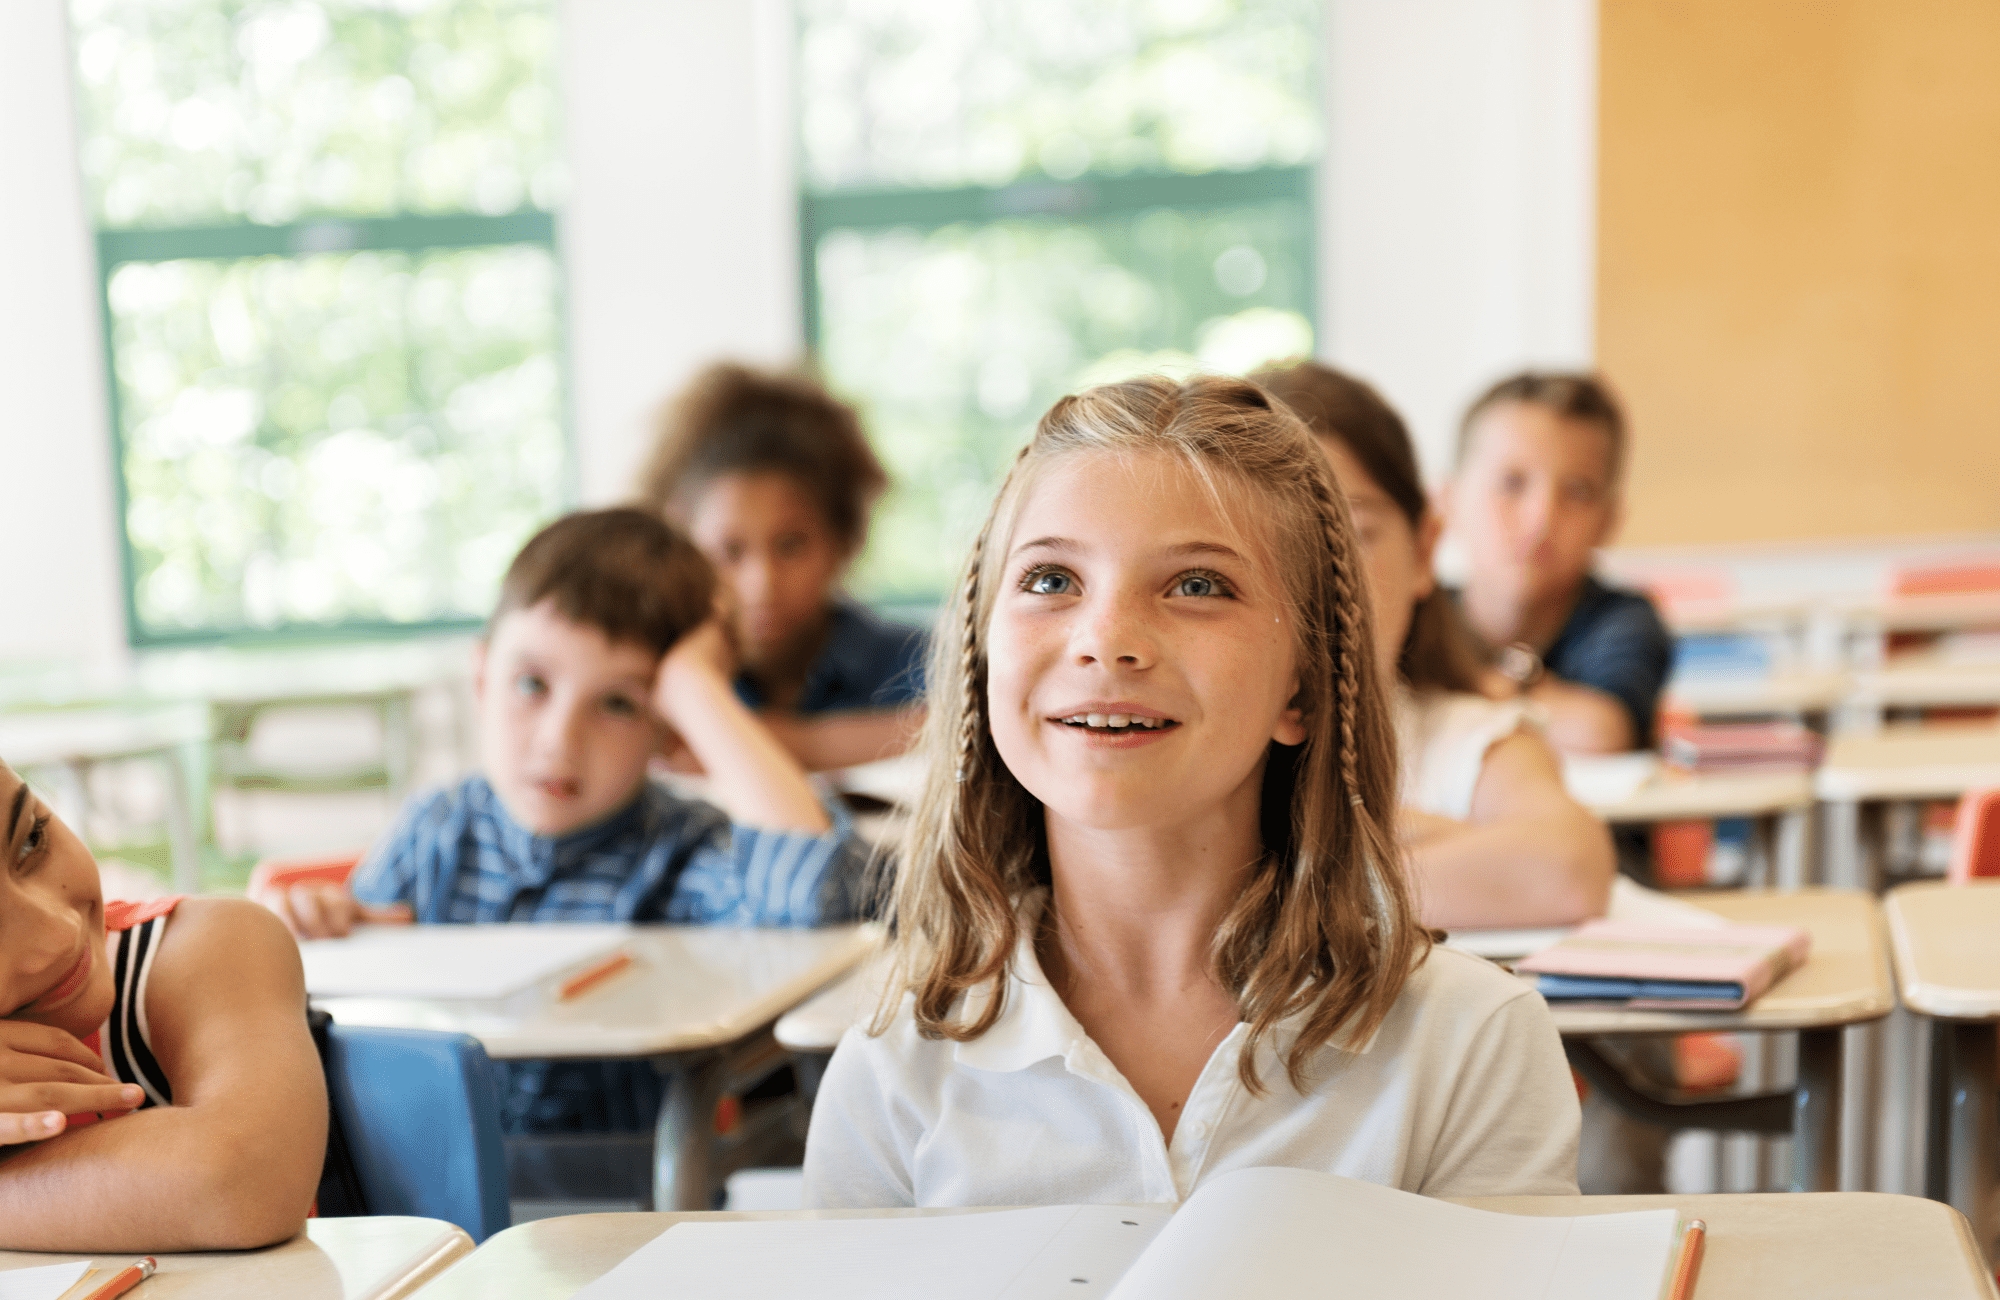 Little girl looking forward in a classroom full of kids